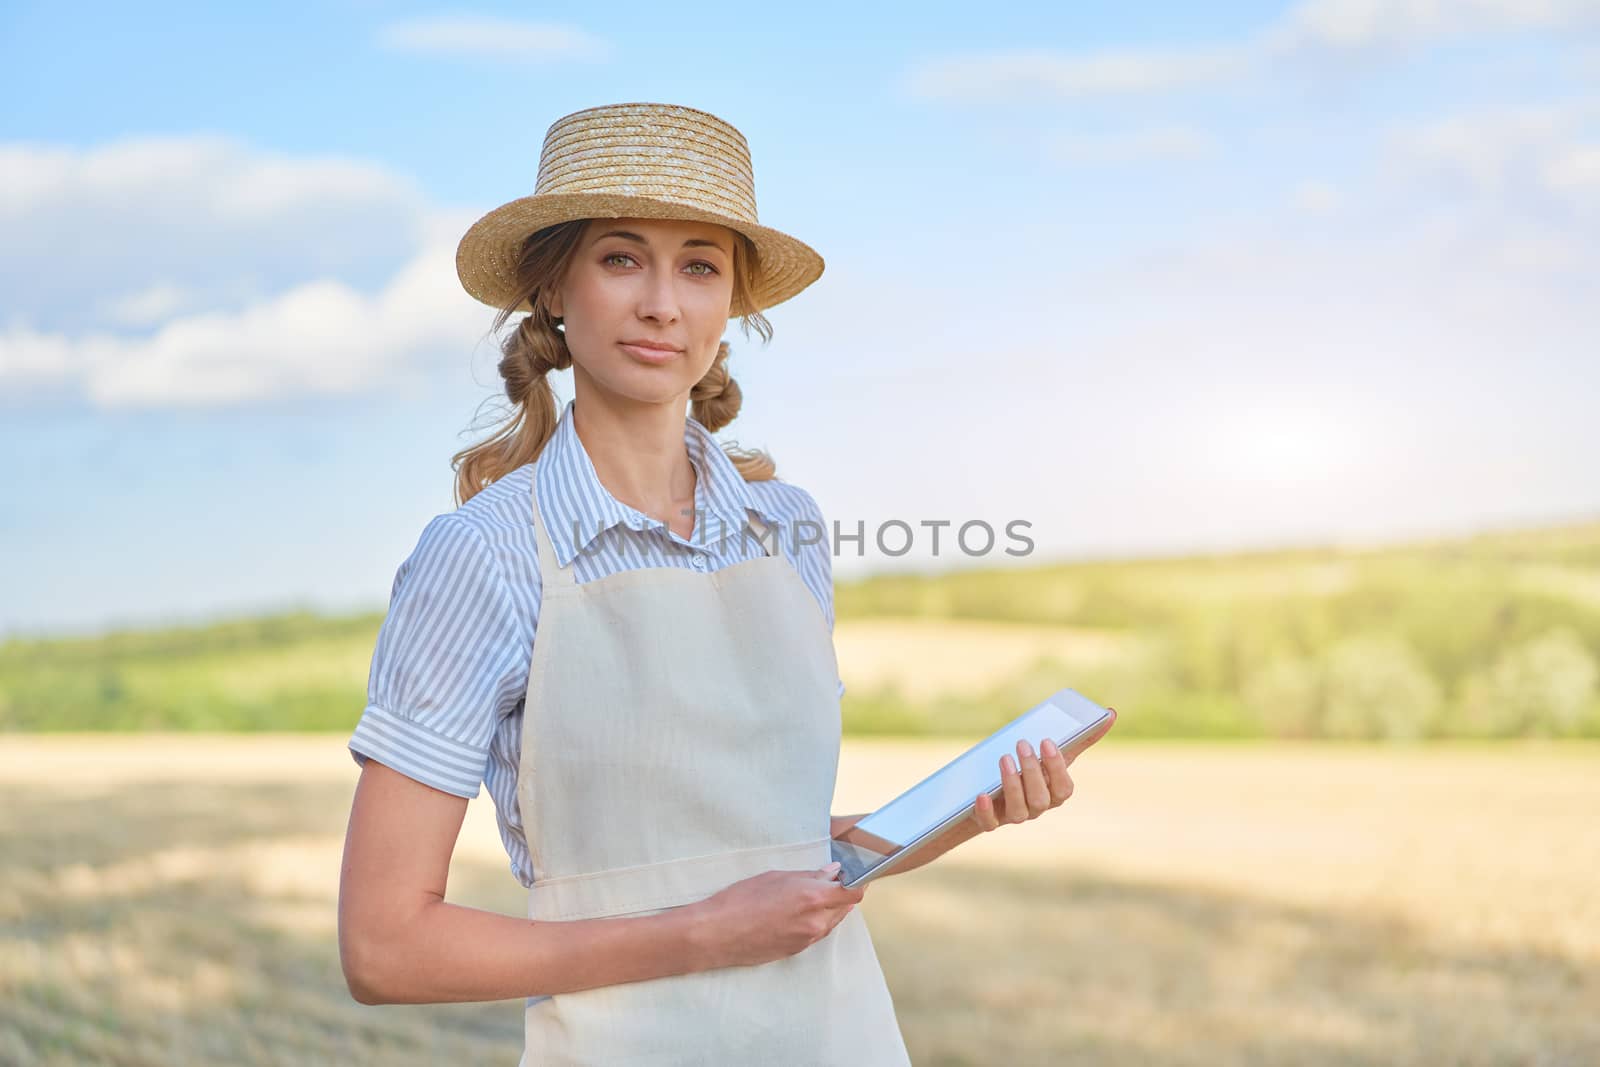 Woman farmer straw hat smart farming standing farmland smiling using digital tablet Female agronomist specialist research monitoring analysis data agribusiness Caucasian worker agricultural field